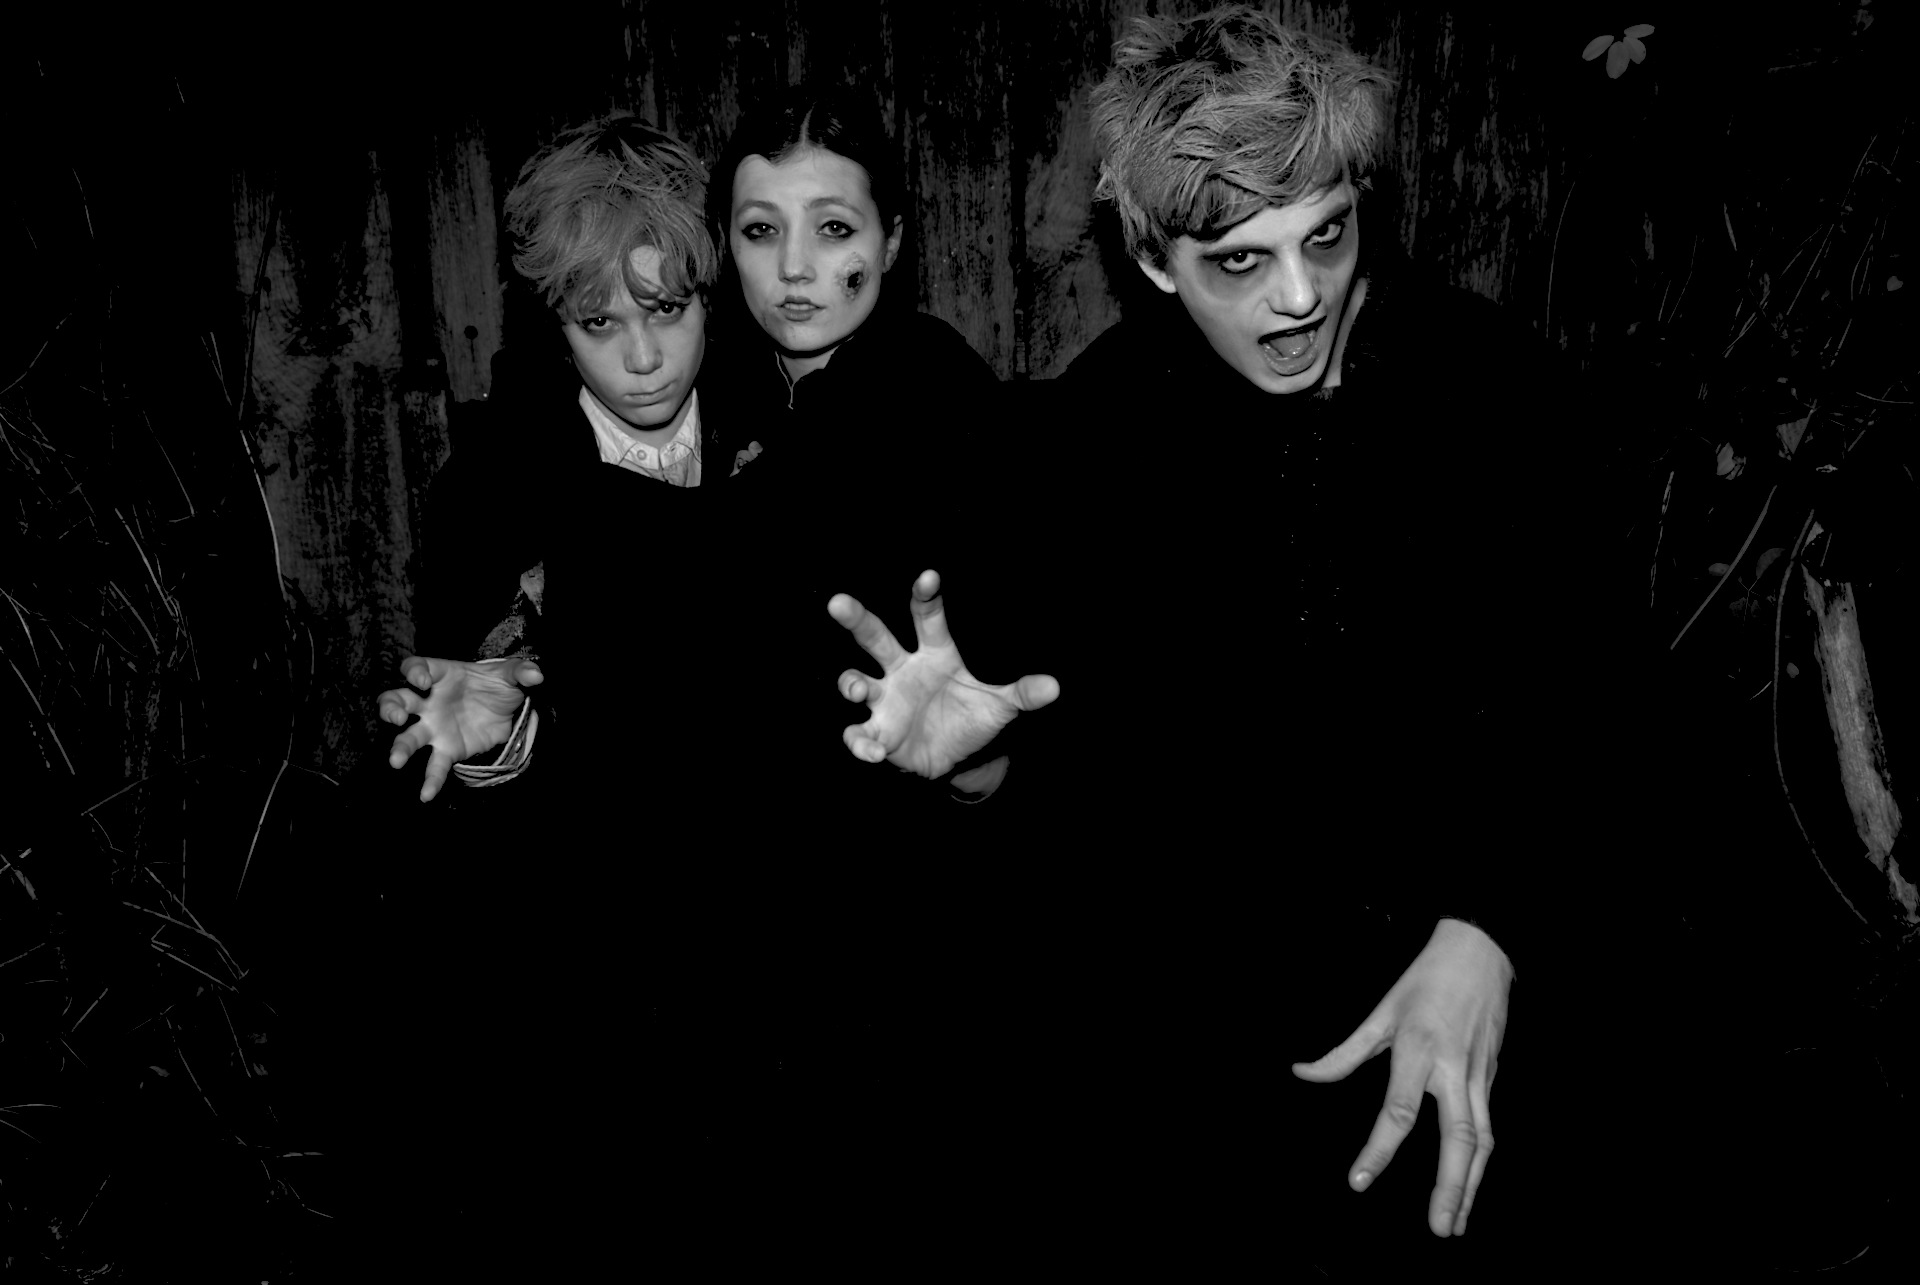 three people with arms outstretched standing in a dark room